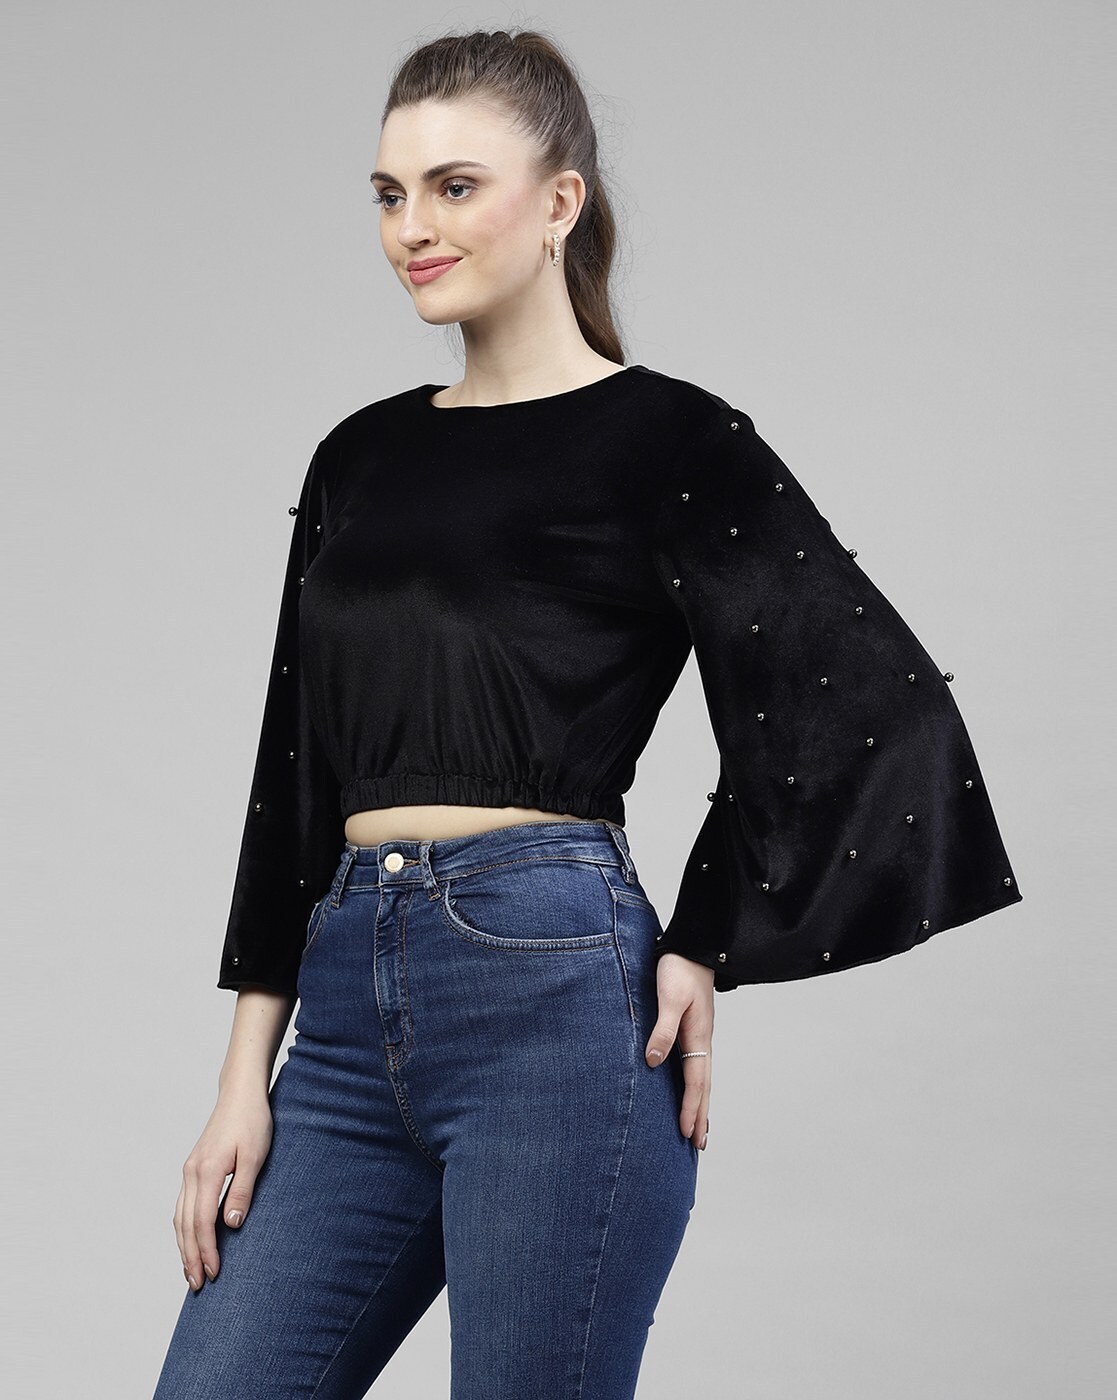 Tulla Lace Bell Sleeve Crop Top in Black